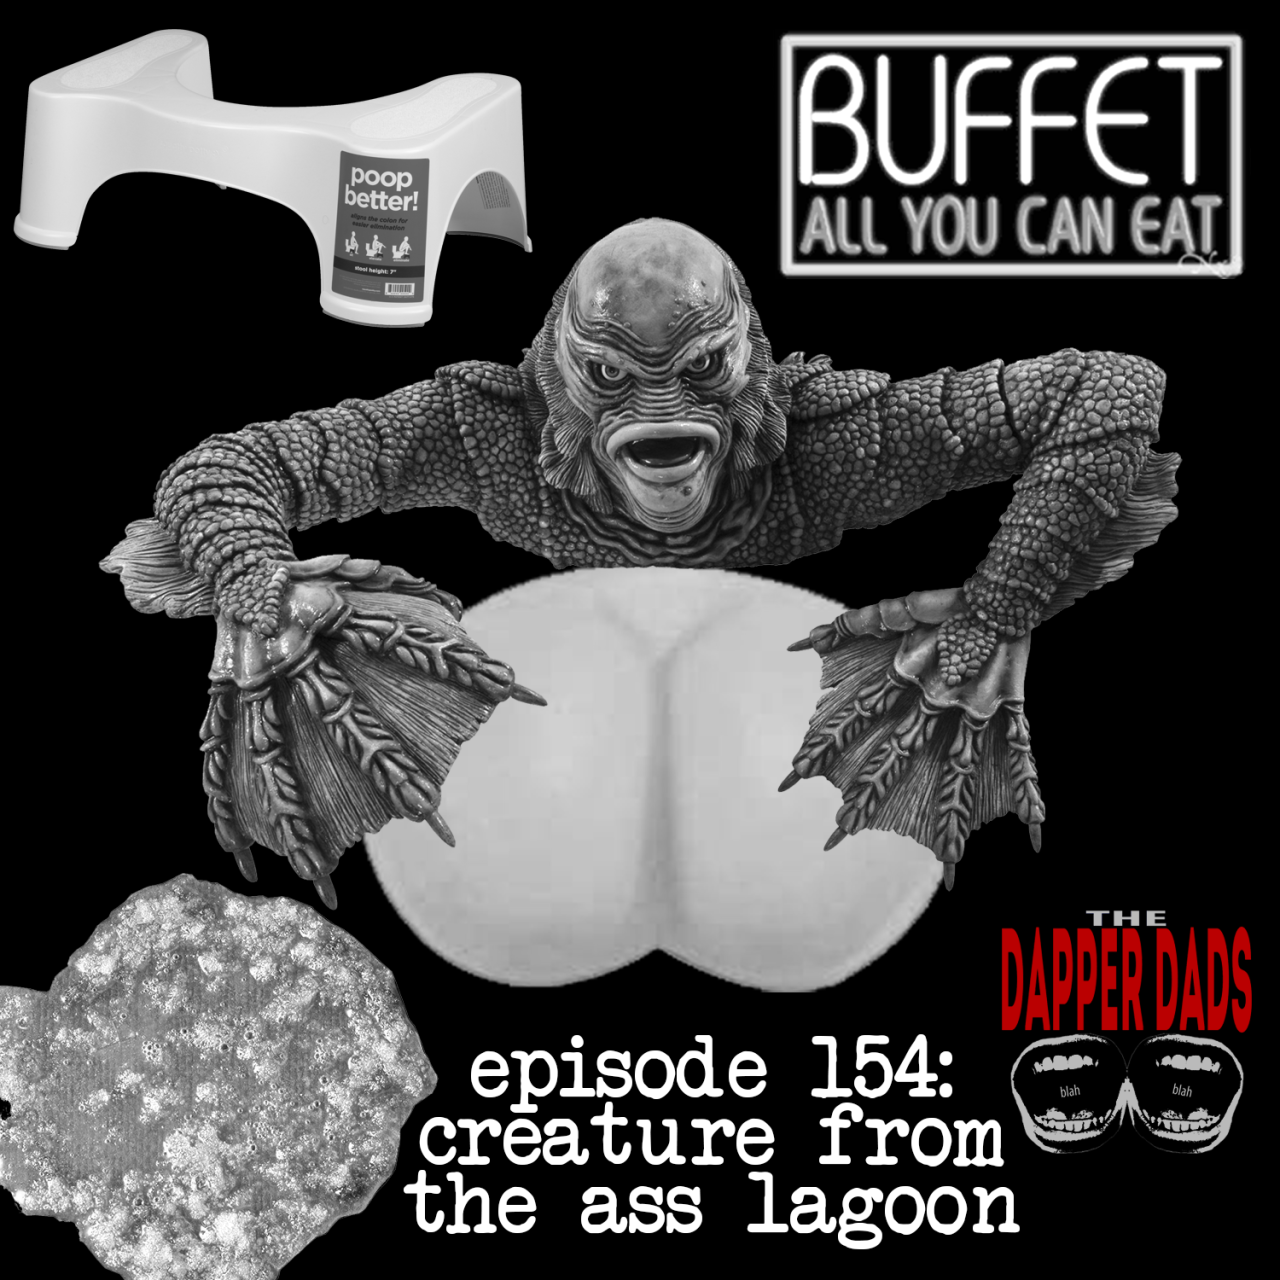 EPISODE 154! We discuss stuff that would kill previous generations, a police chase, words and accents, buffets, straws, recap of the dadsquad reunion, some vomit, angry drinking, finally experiencing pure ecstasy, squatty potty, returning pants,...